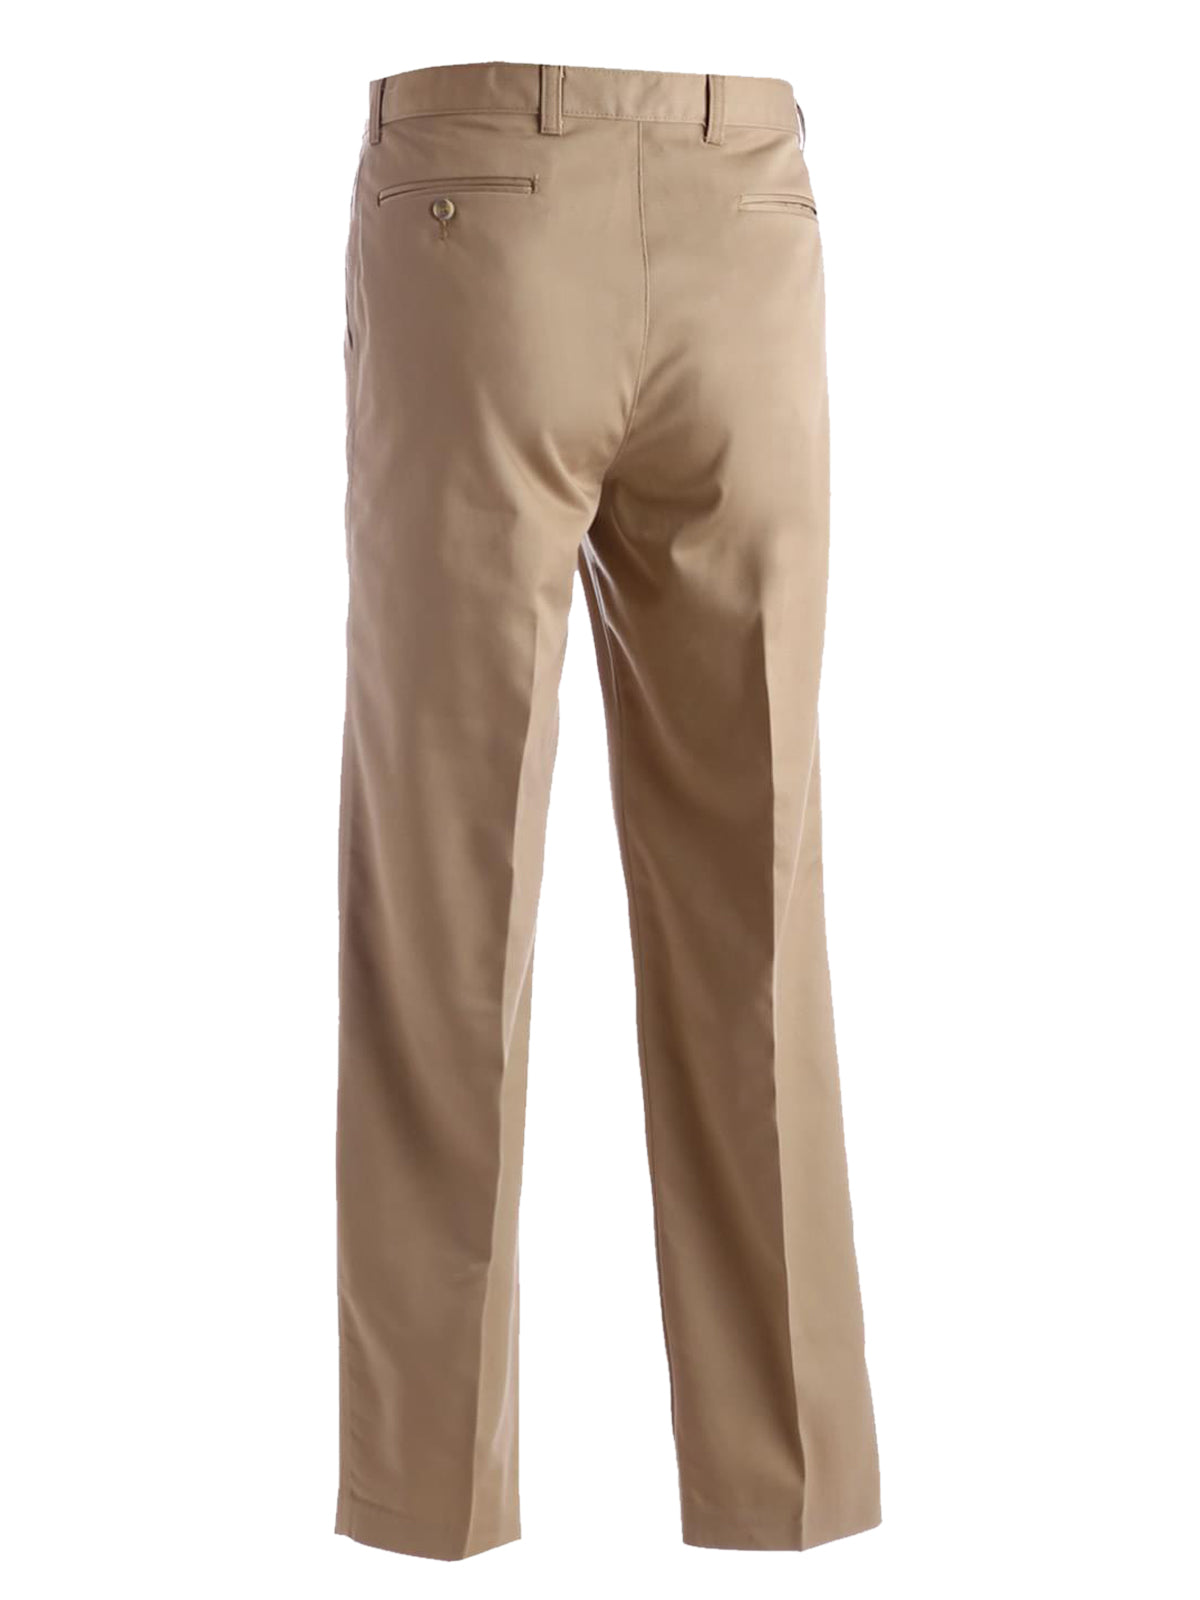 Men's Business Chino Flat Front Pant